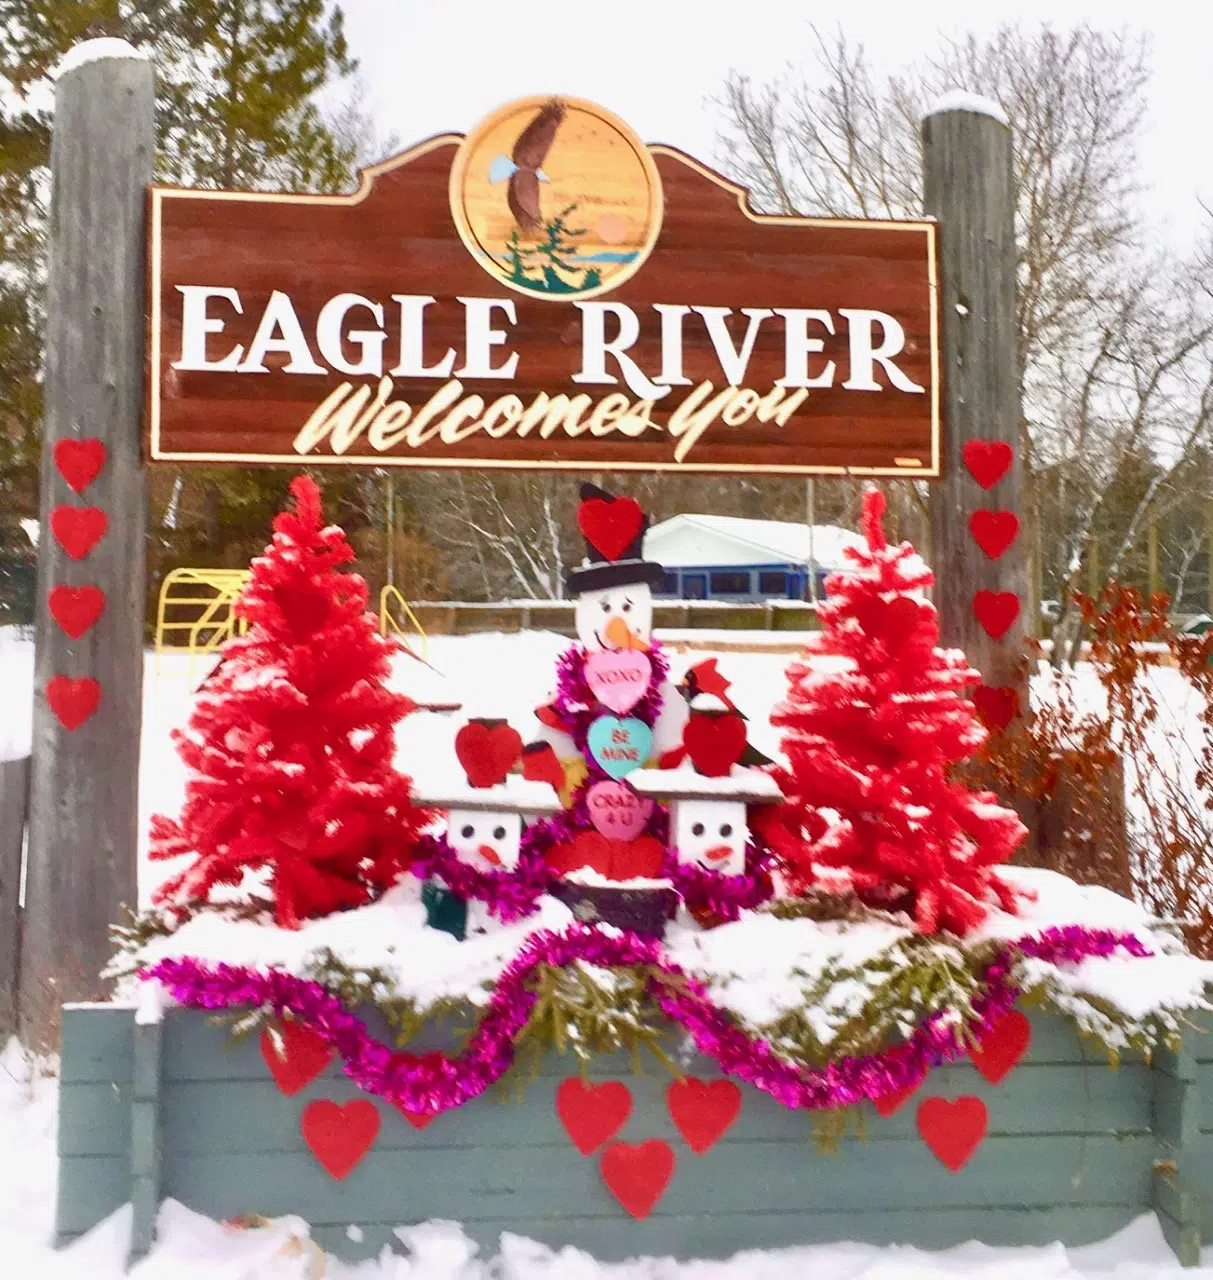 Community Spirit Continues In Eagle RIver